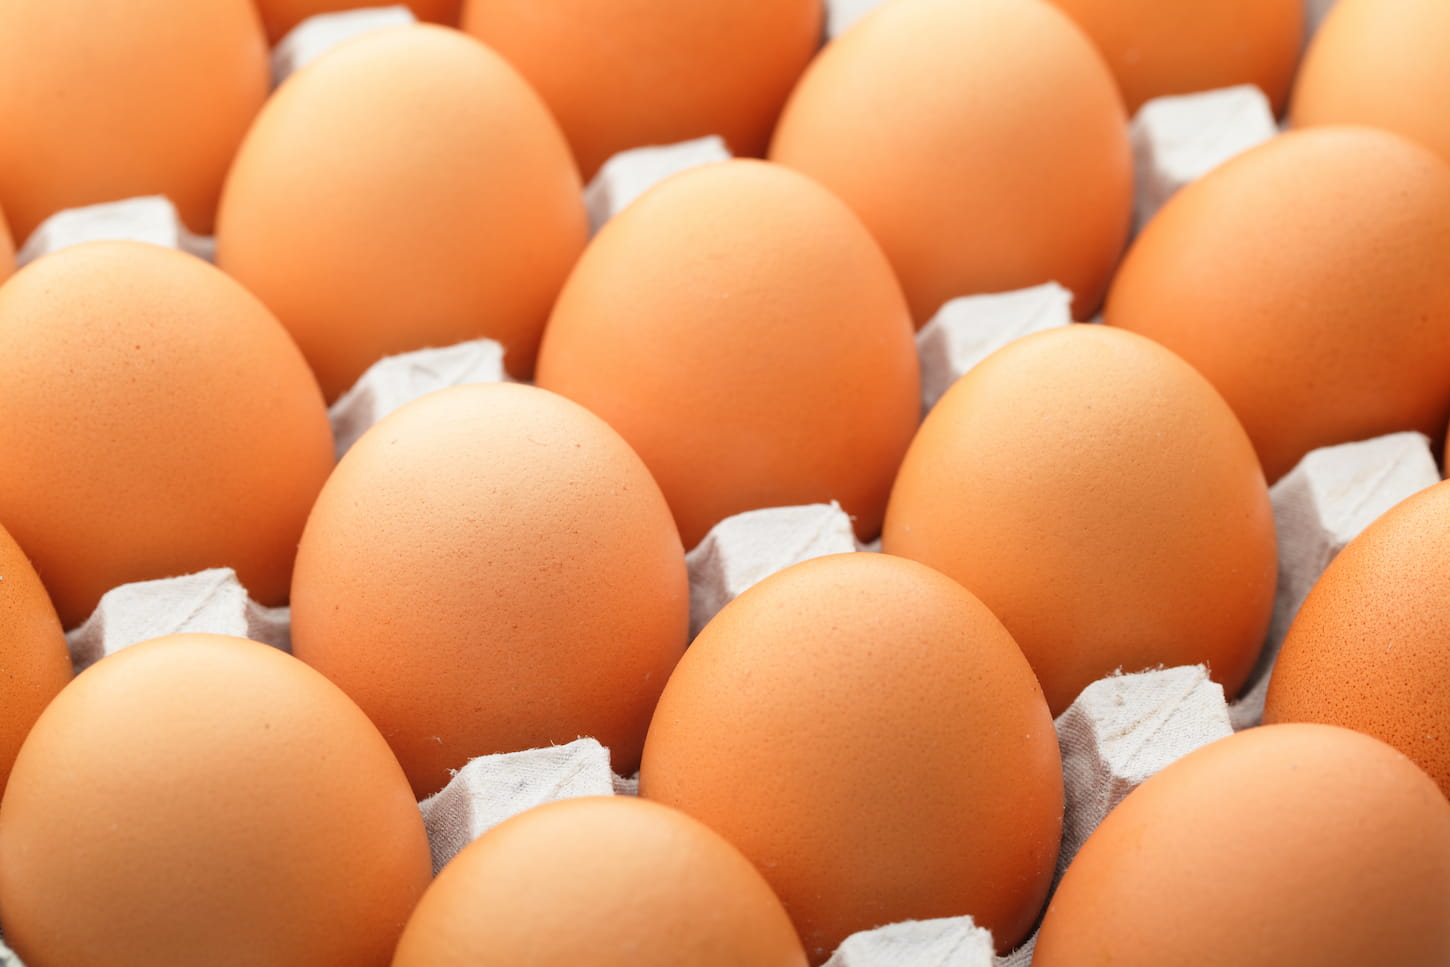 Do You Have to Refrigerate Fresh Eggs?